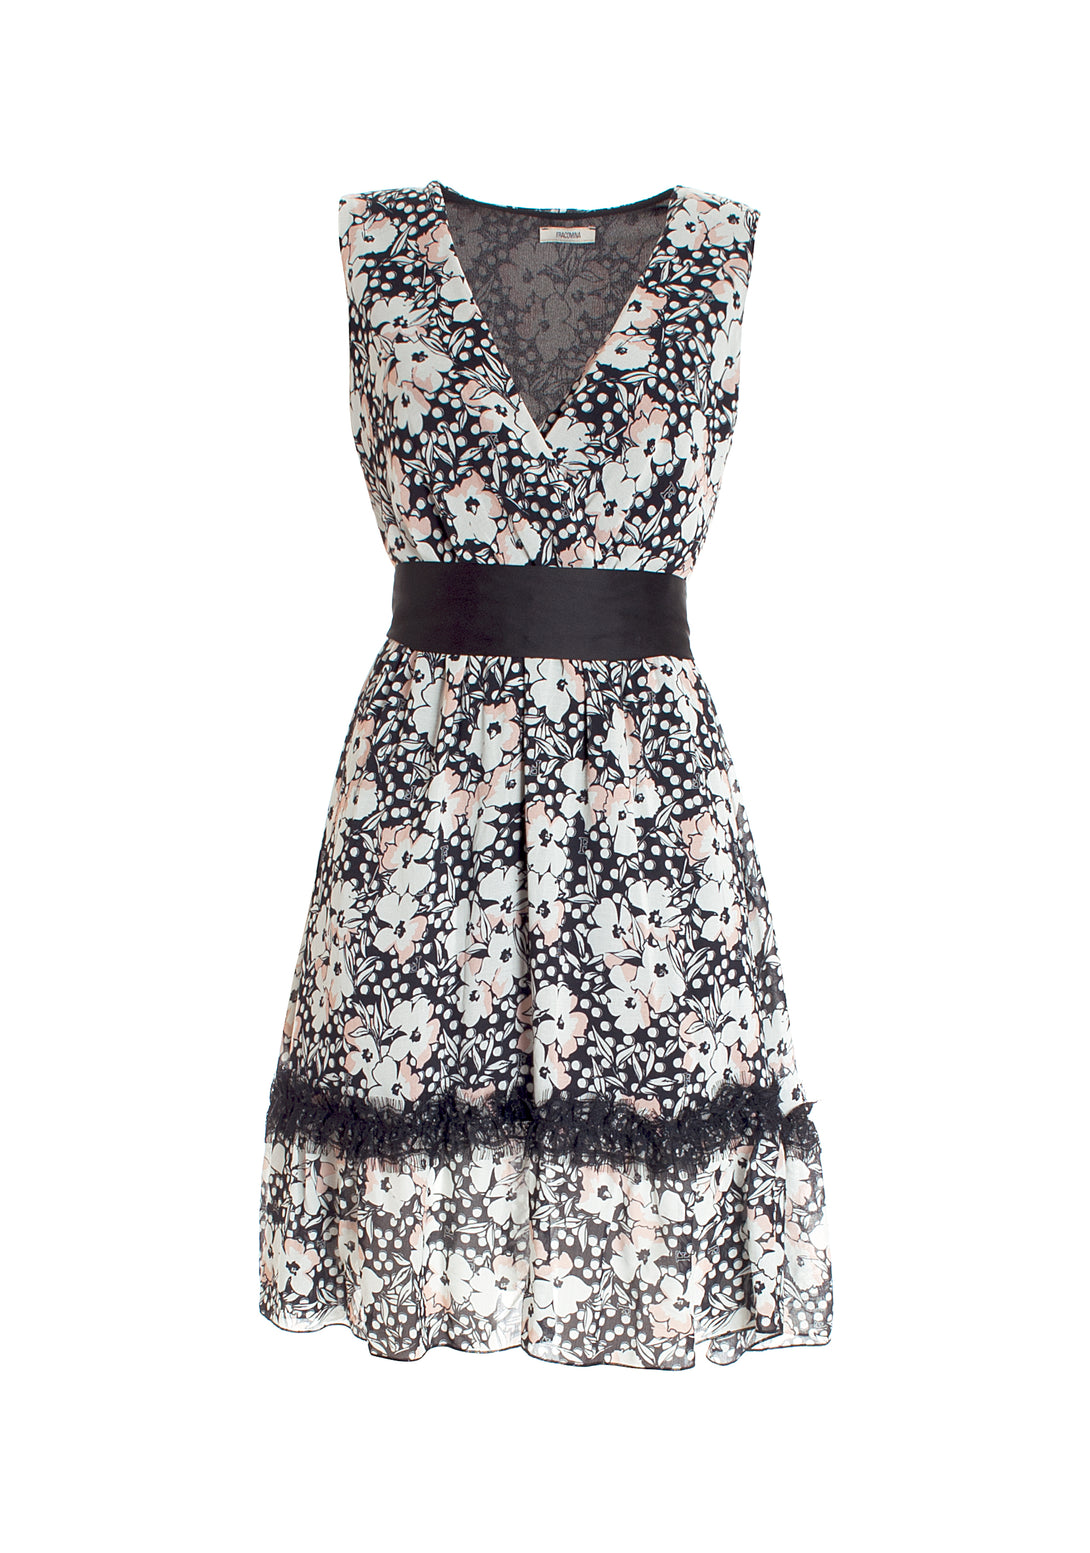 Dress with flowery pattern and no sleeves